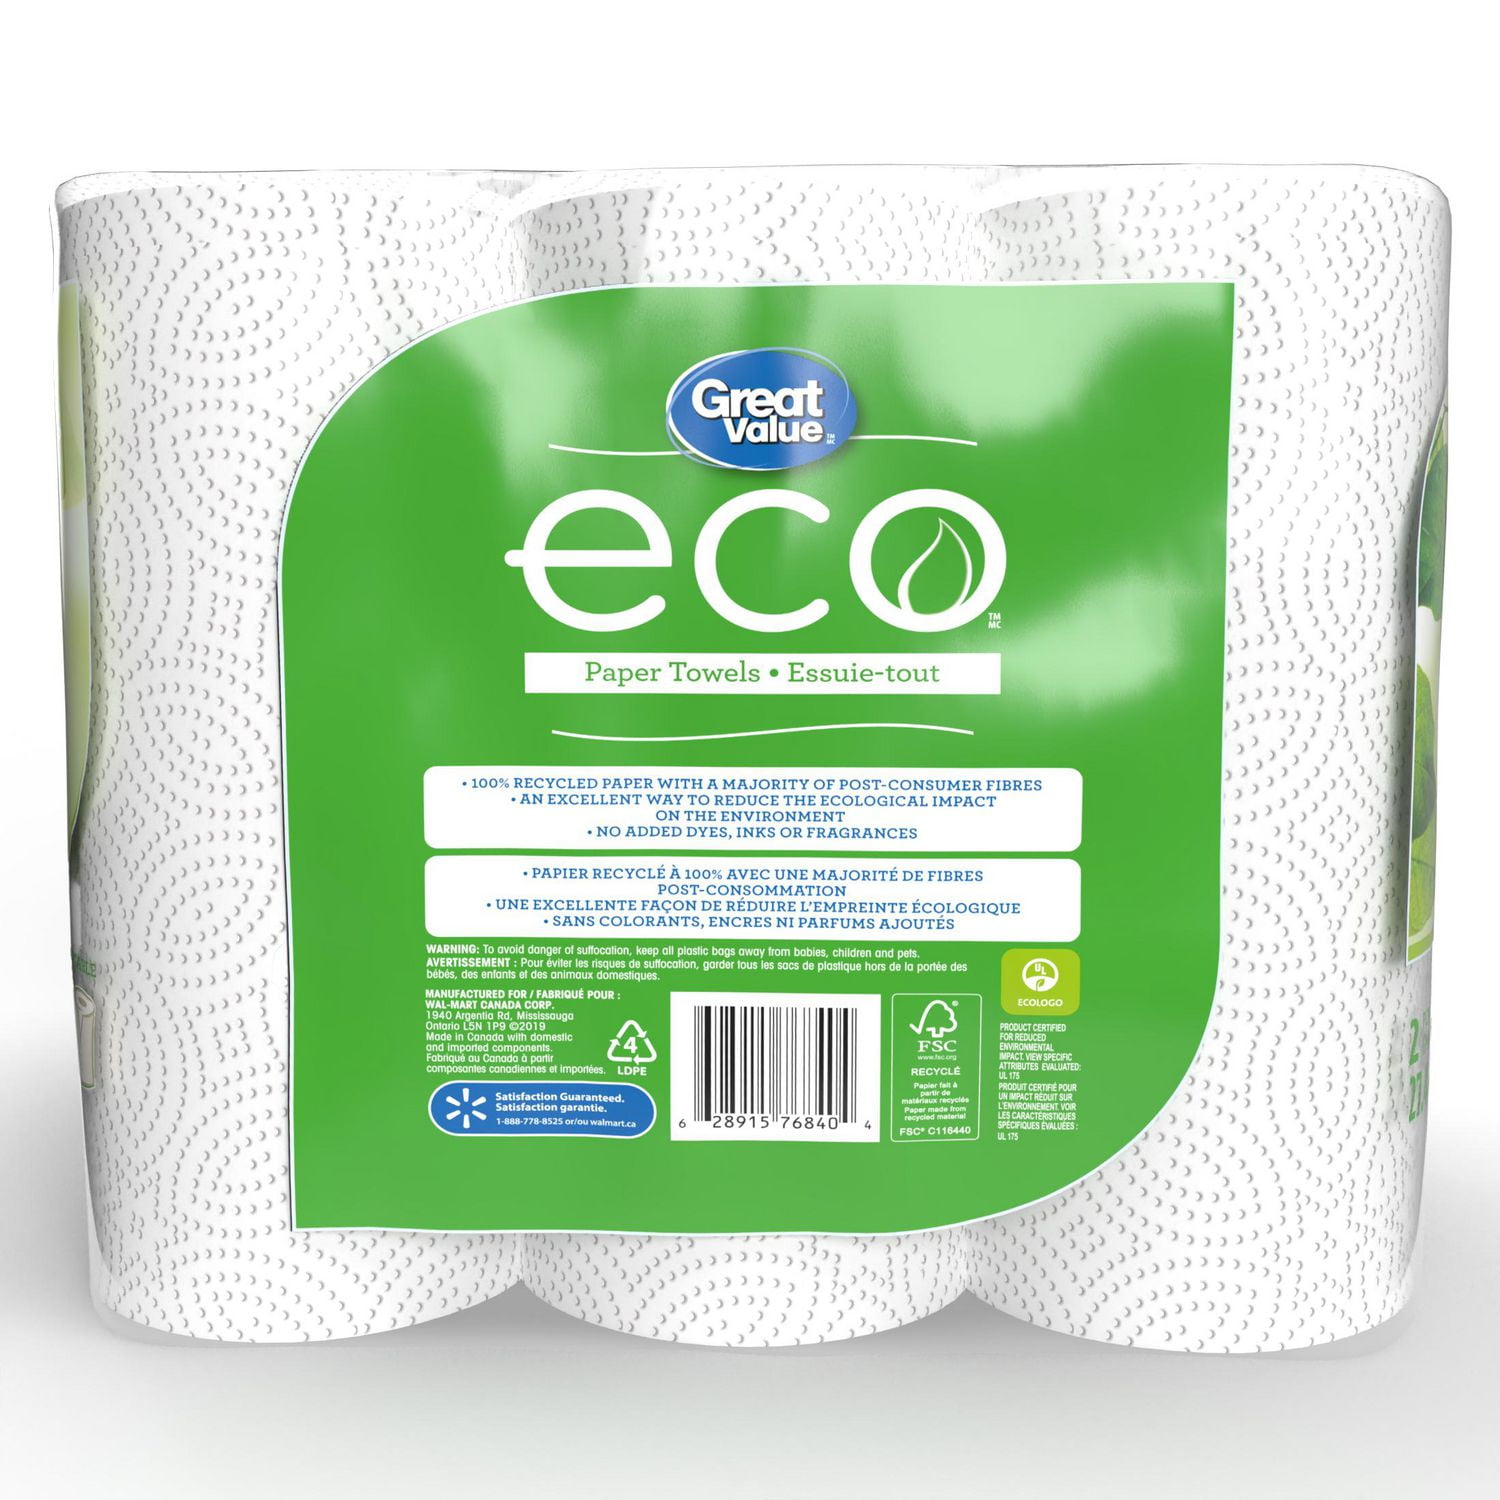 Great Value ECO Paper Towels, 6 jumbo rolls, 105 sheets, 105 sheet  adaptable size 